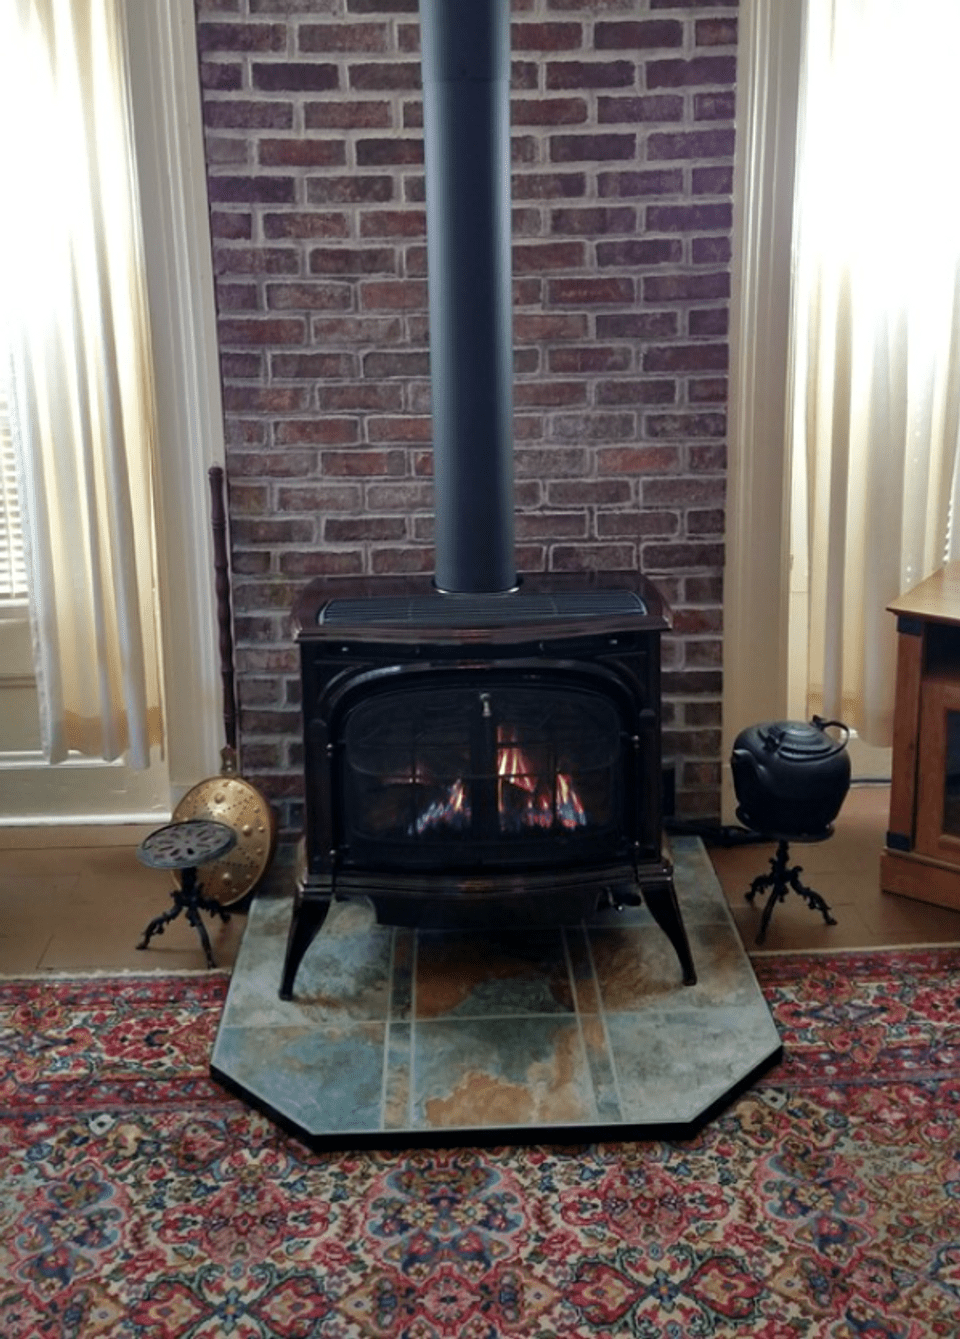 Vermont Castings Freestanding Gas Stoves